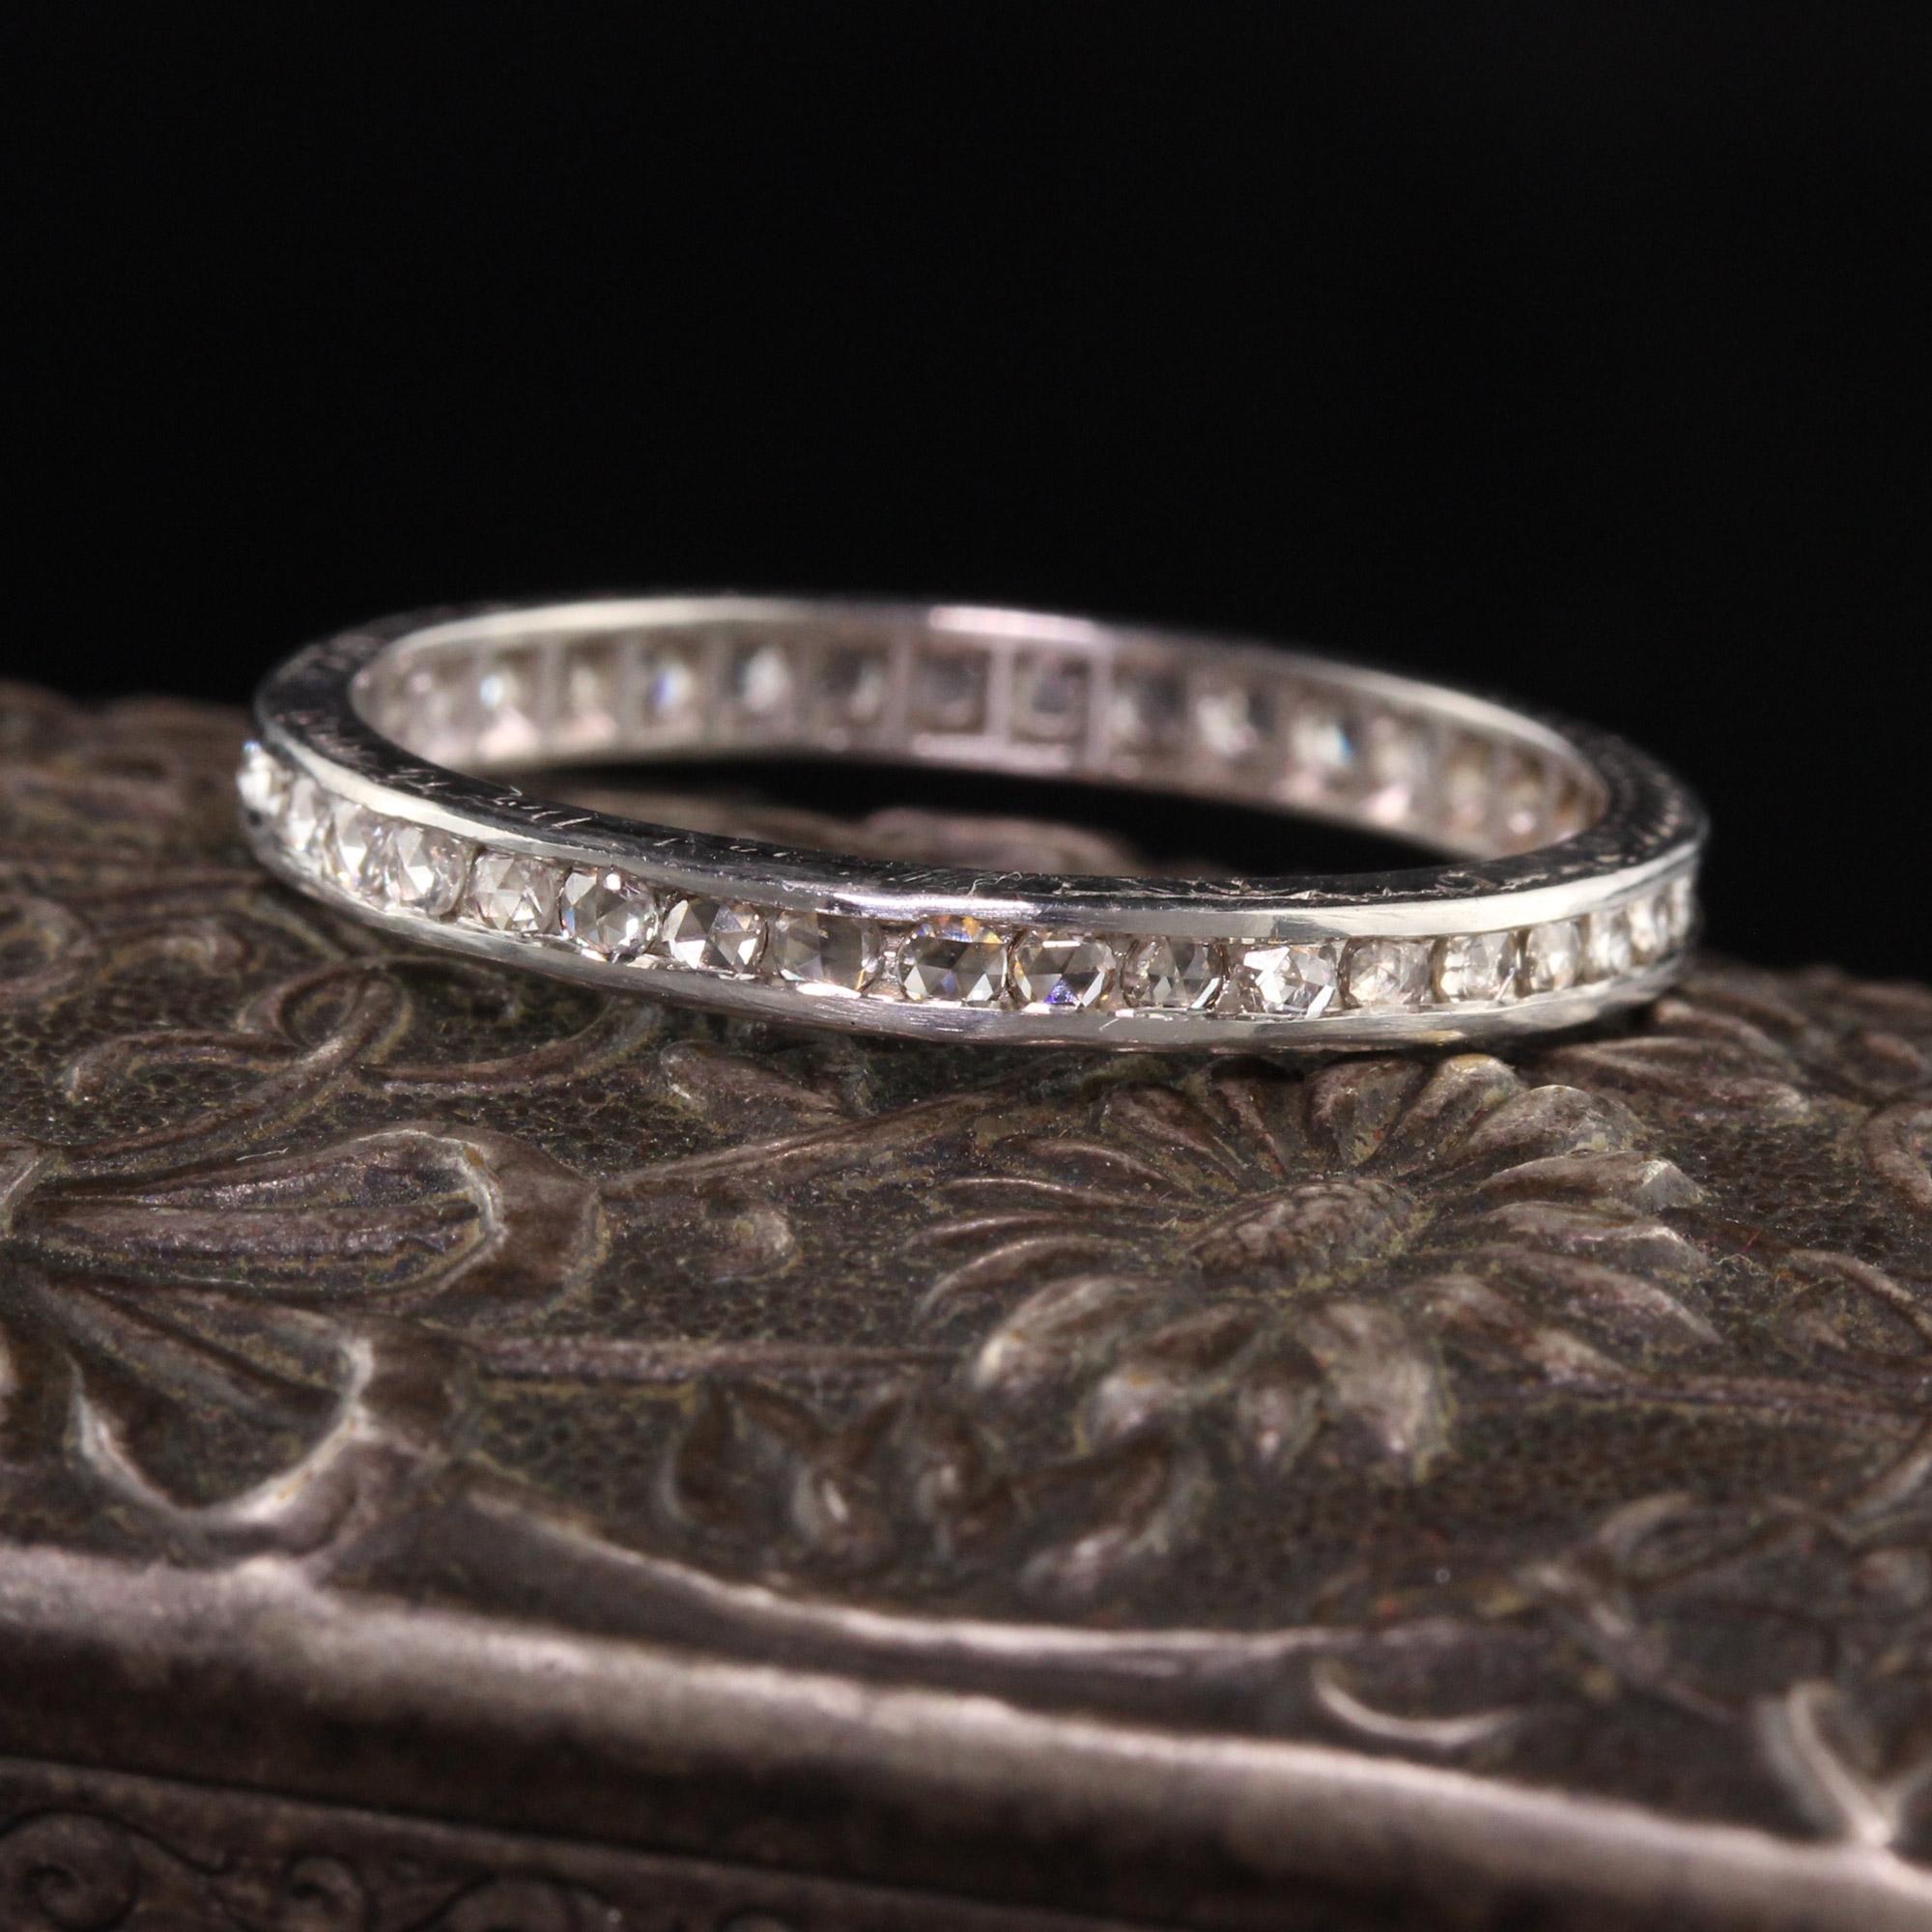 Beautiful Antique Art Deco Platinum Diamond Rose Cut Eternity Band. This gorgeous eternity band has rose cut diamonds set in a beautiful art deco eternity band. The band also still has the engravings intact on the sides.

Item #R1013

Metal: